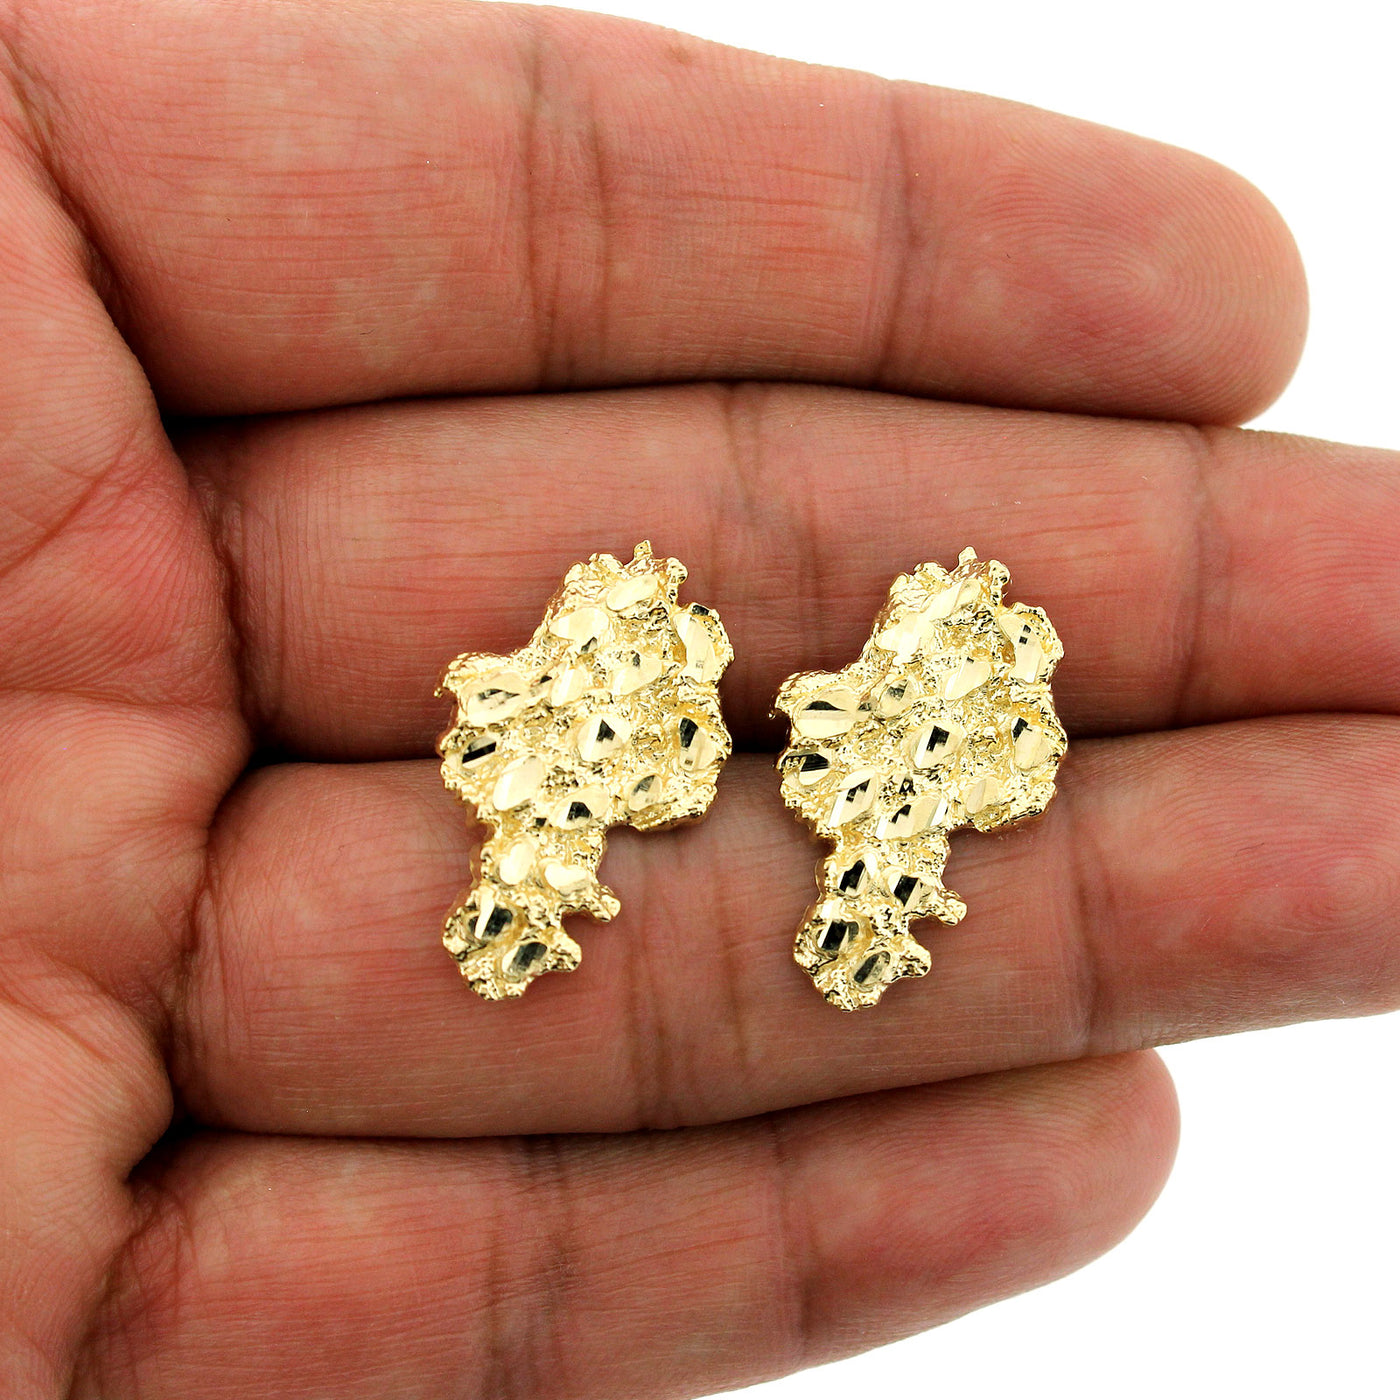 Mens Real 10K Solid Yellow Gold Extra Large Nugget Stud Earrings